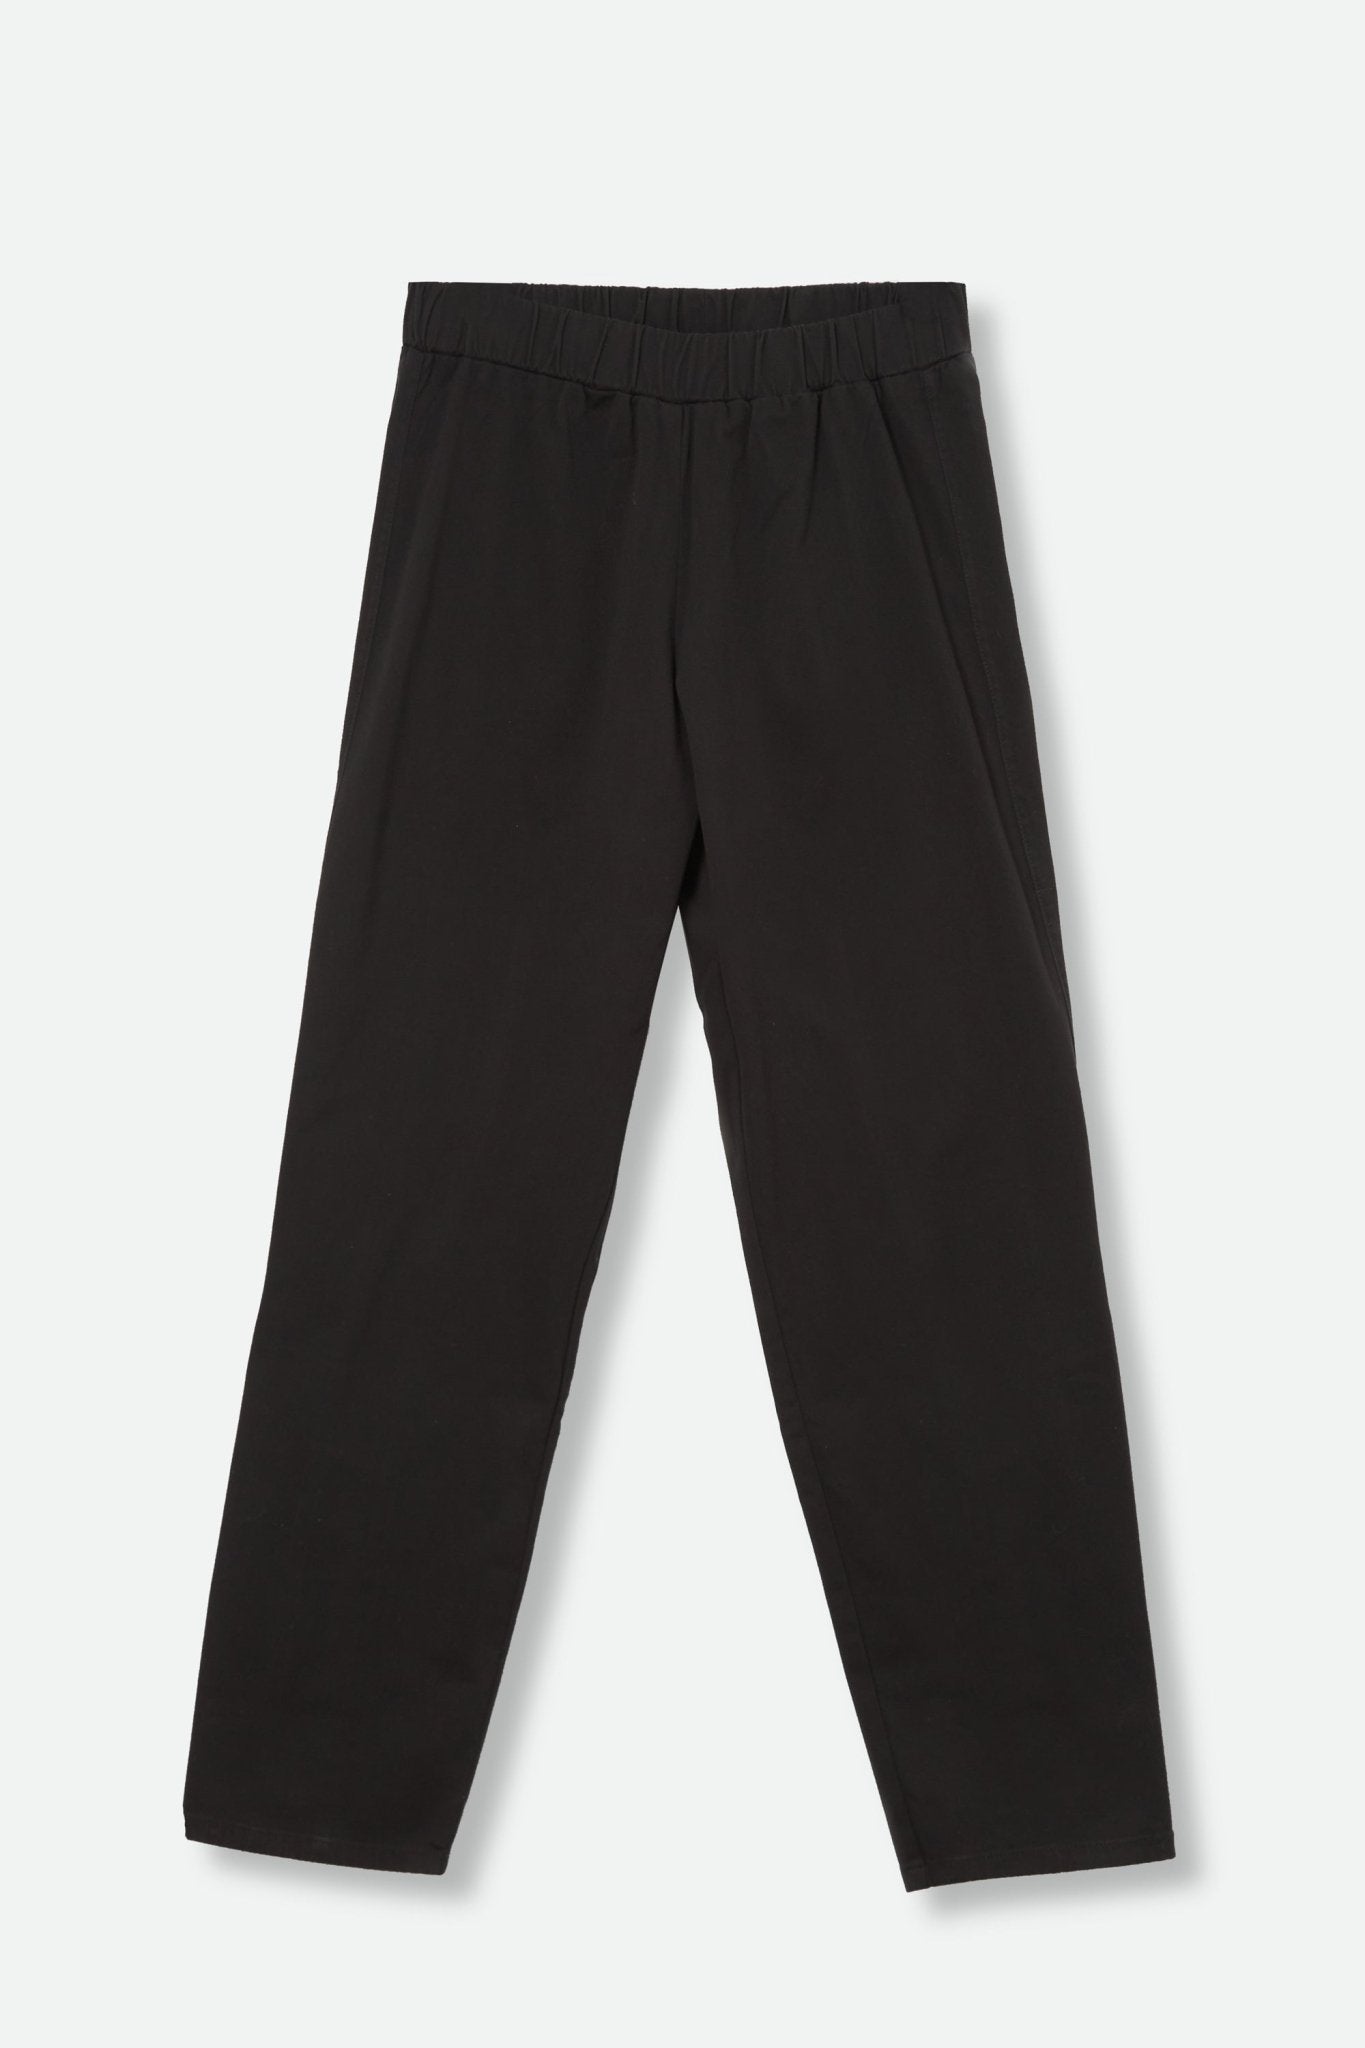 PERRYN PANT IN COTTON STRETCH IN BLACK - Jarbo